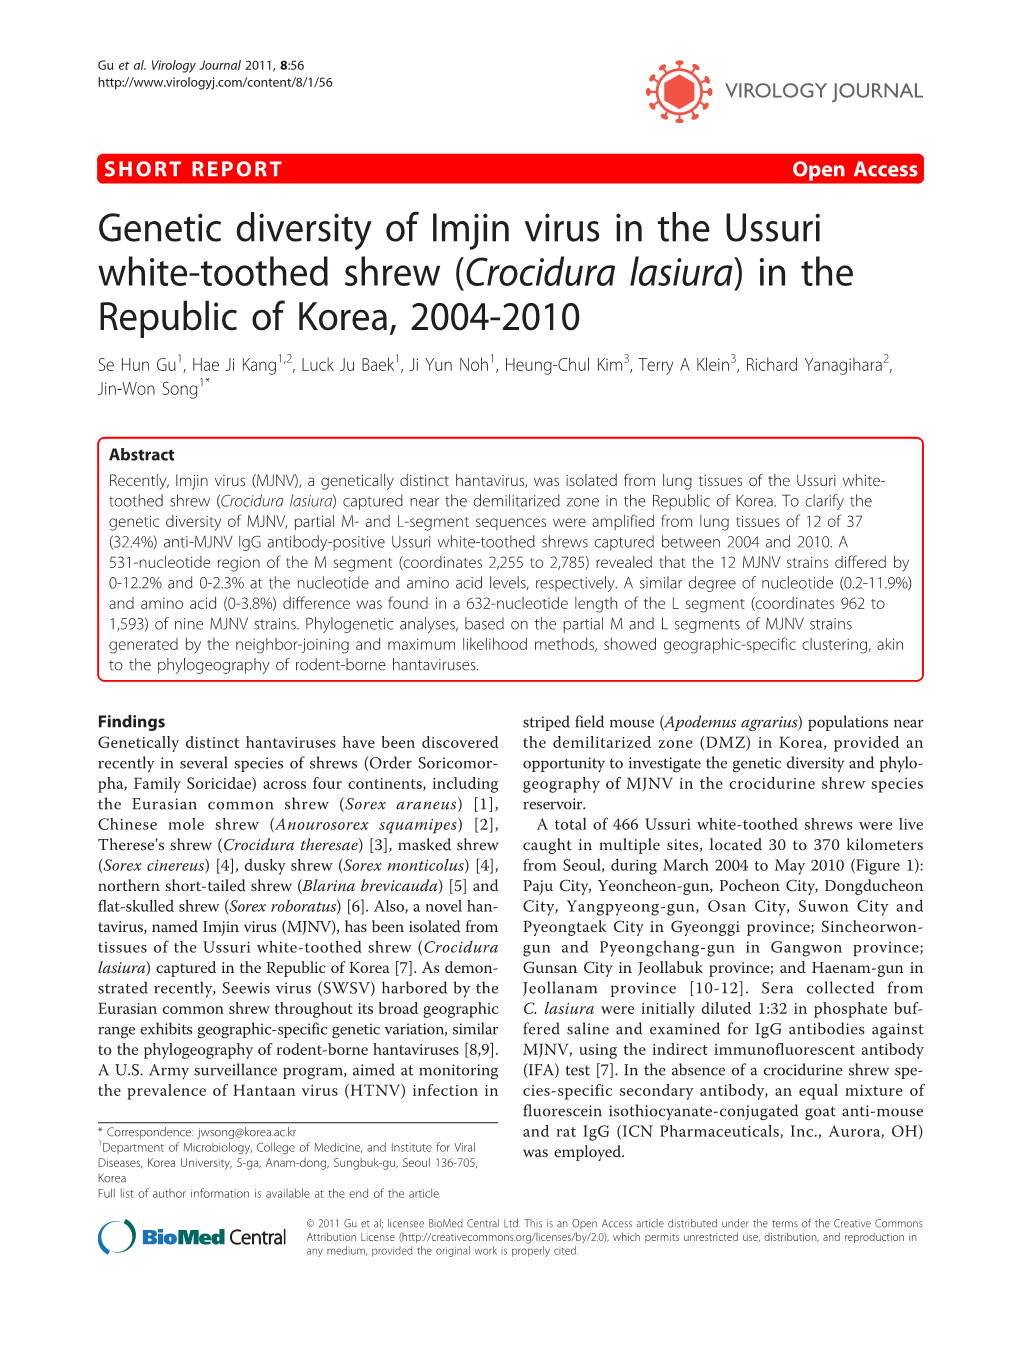 Genetic Diversity of Imjin Virus in the Ussuri White-Toothed Shrew